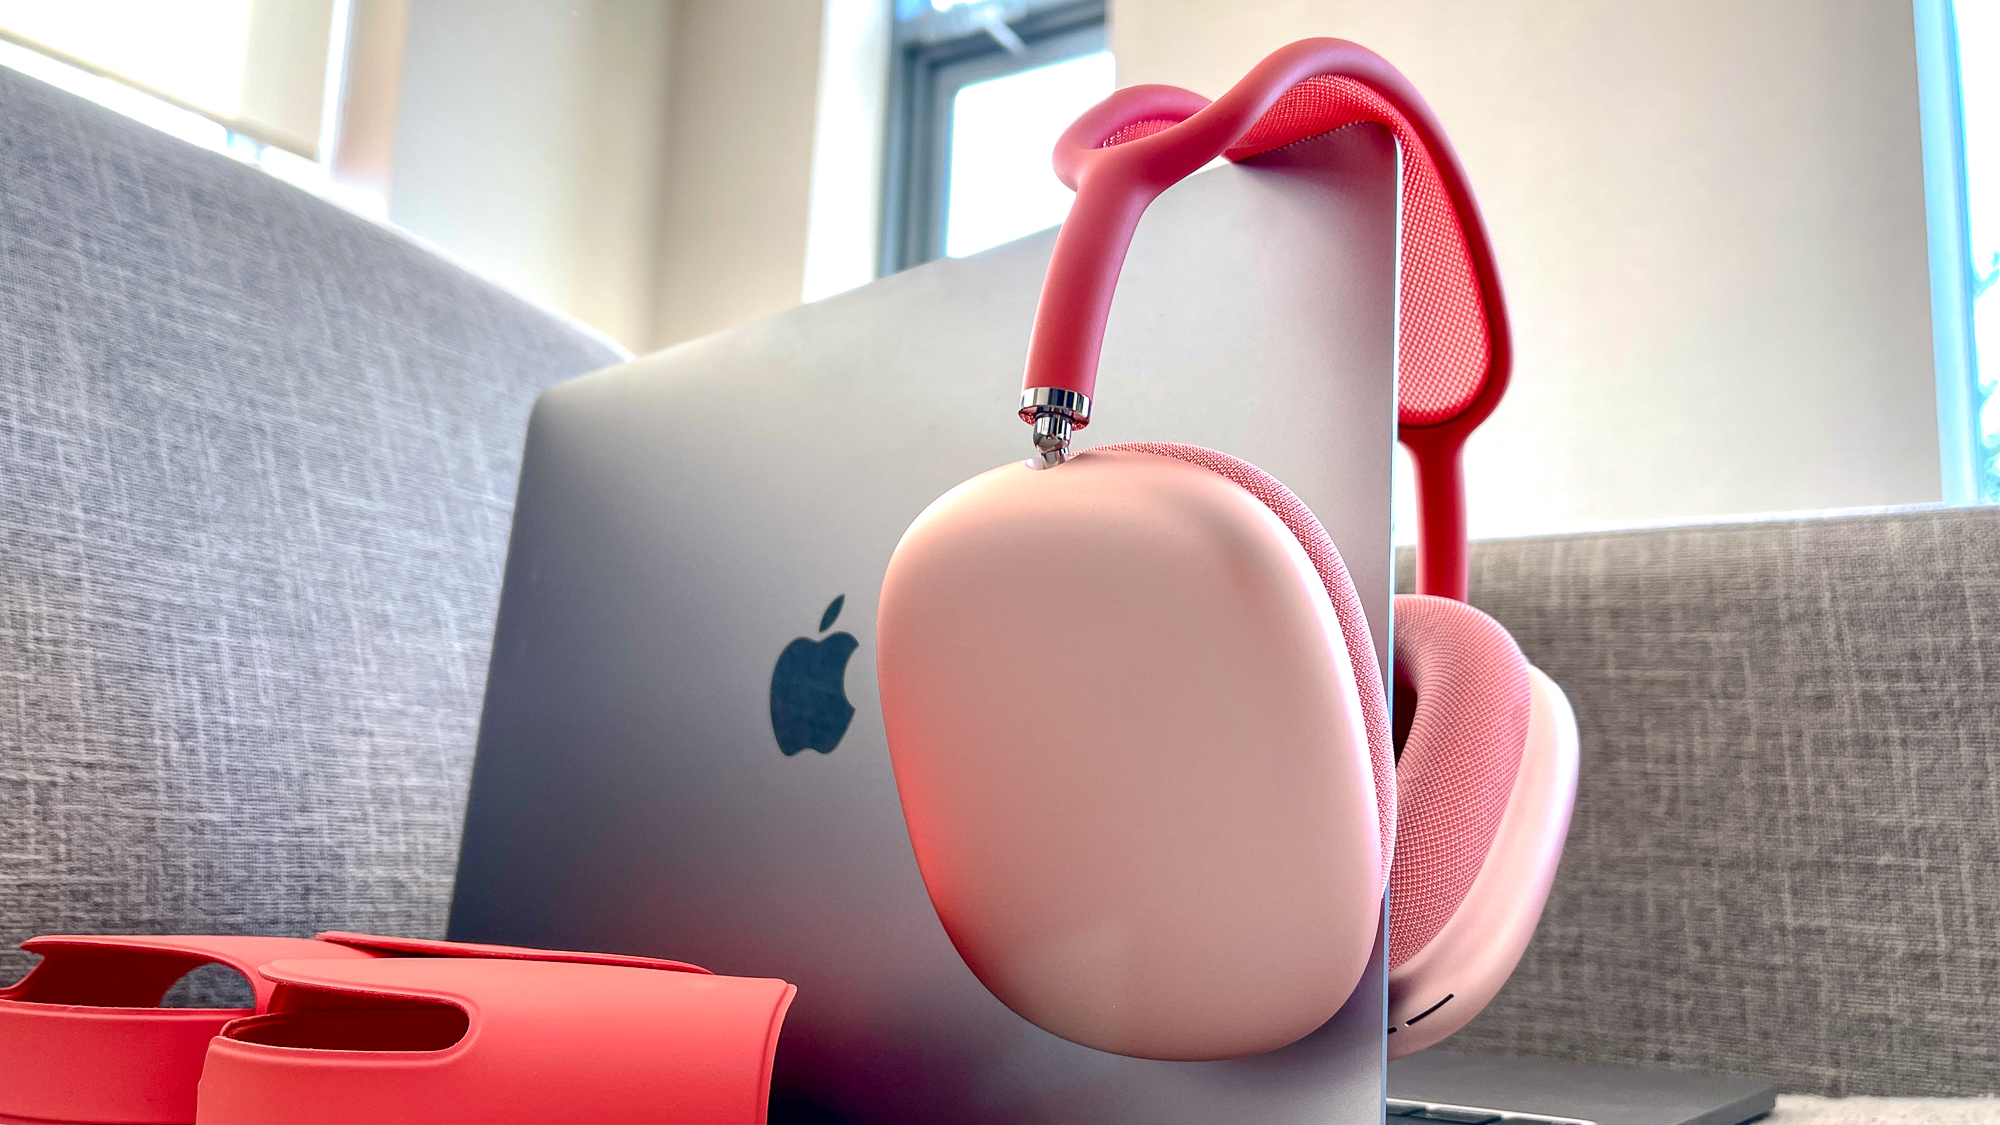 AirPods Max three months later — is it really worth $549? | Tom's